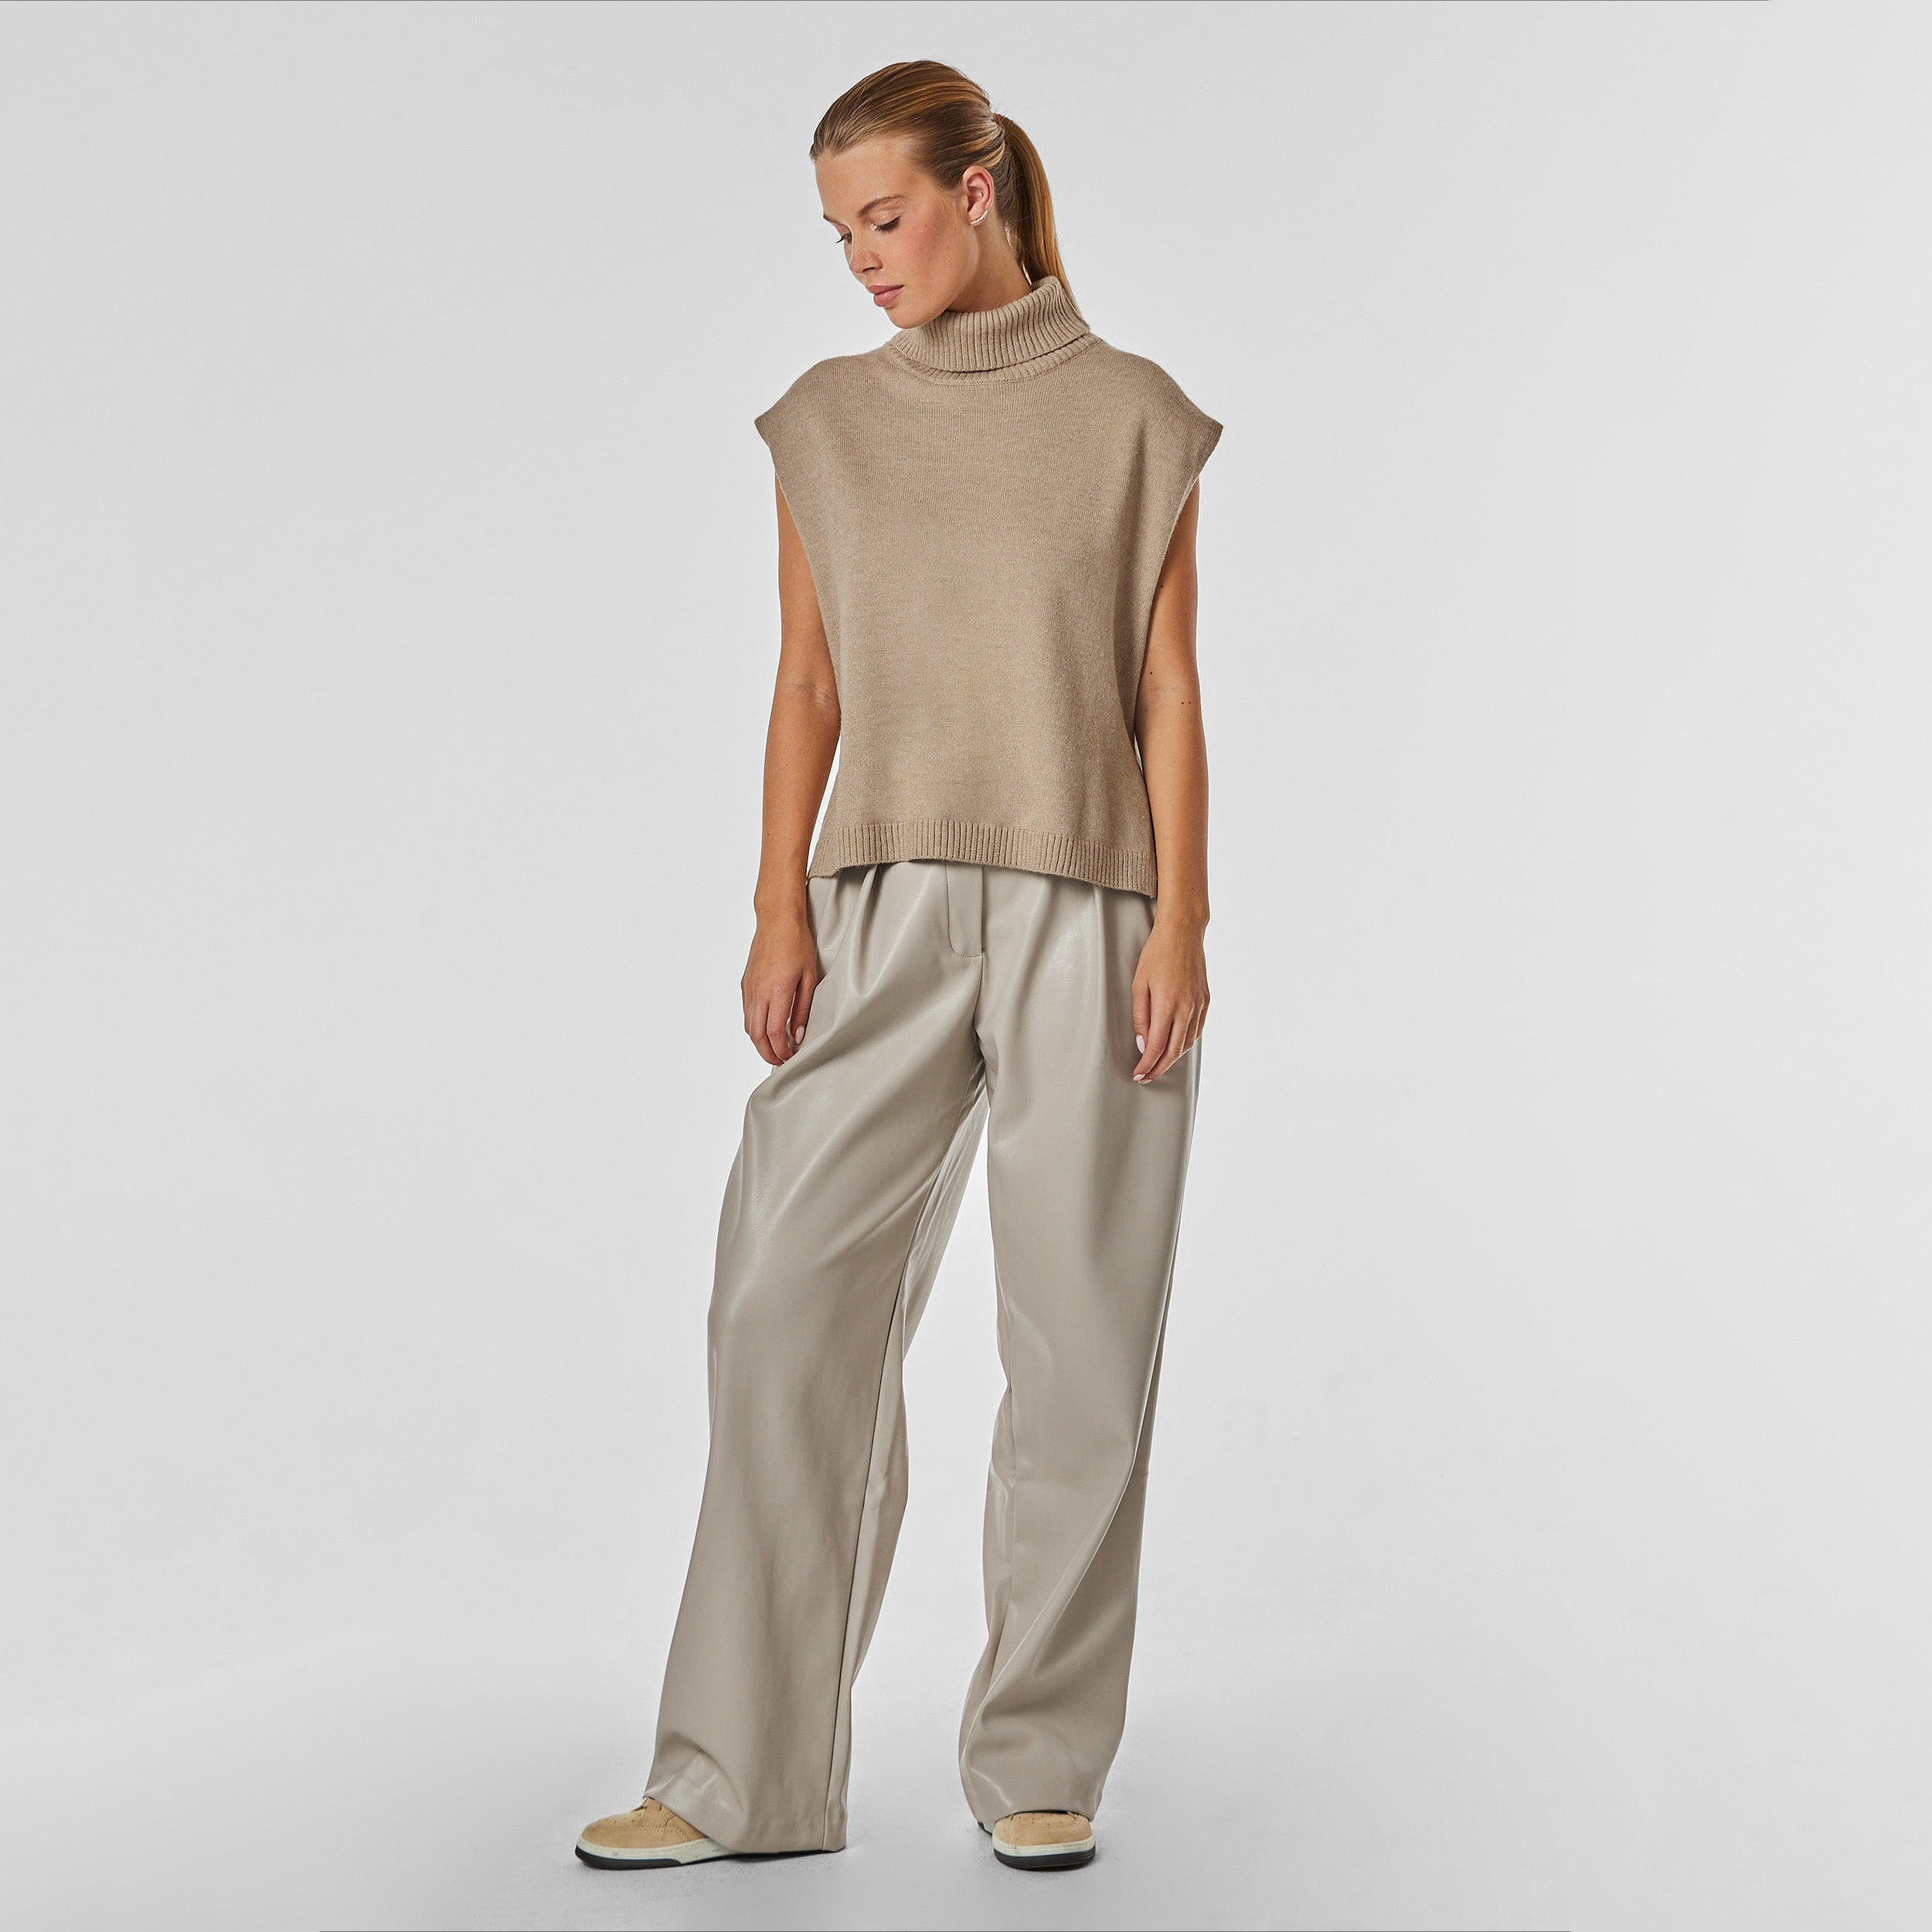 Full body front view of woman wearing pleated high rise faux leather cream trouser.